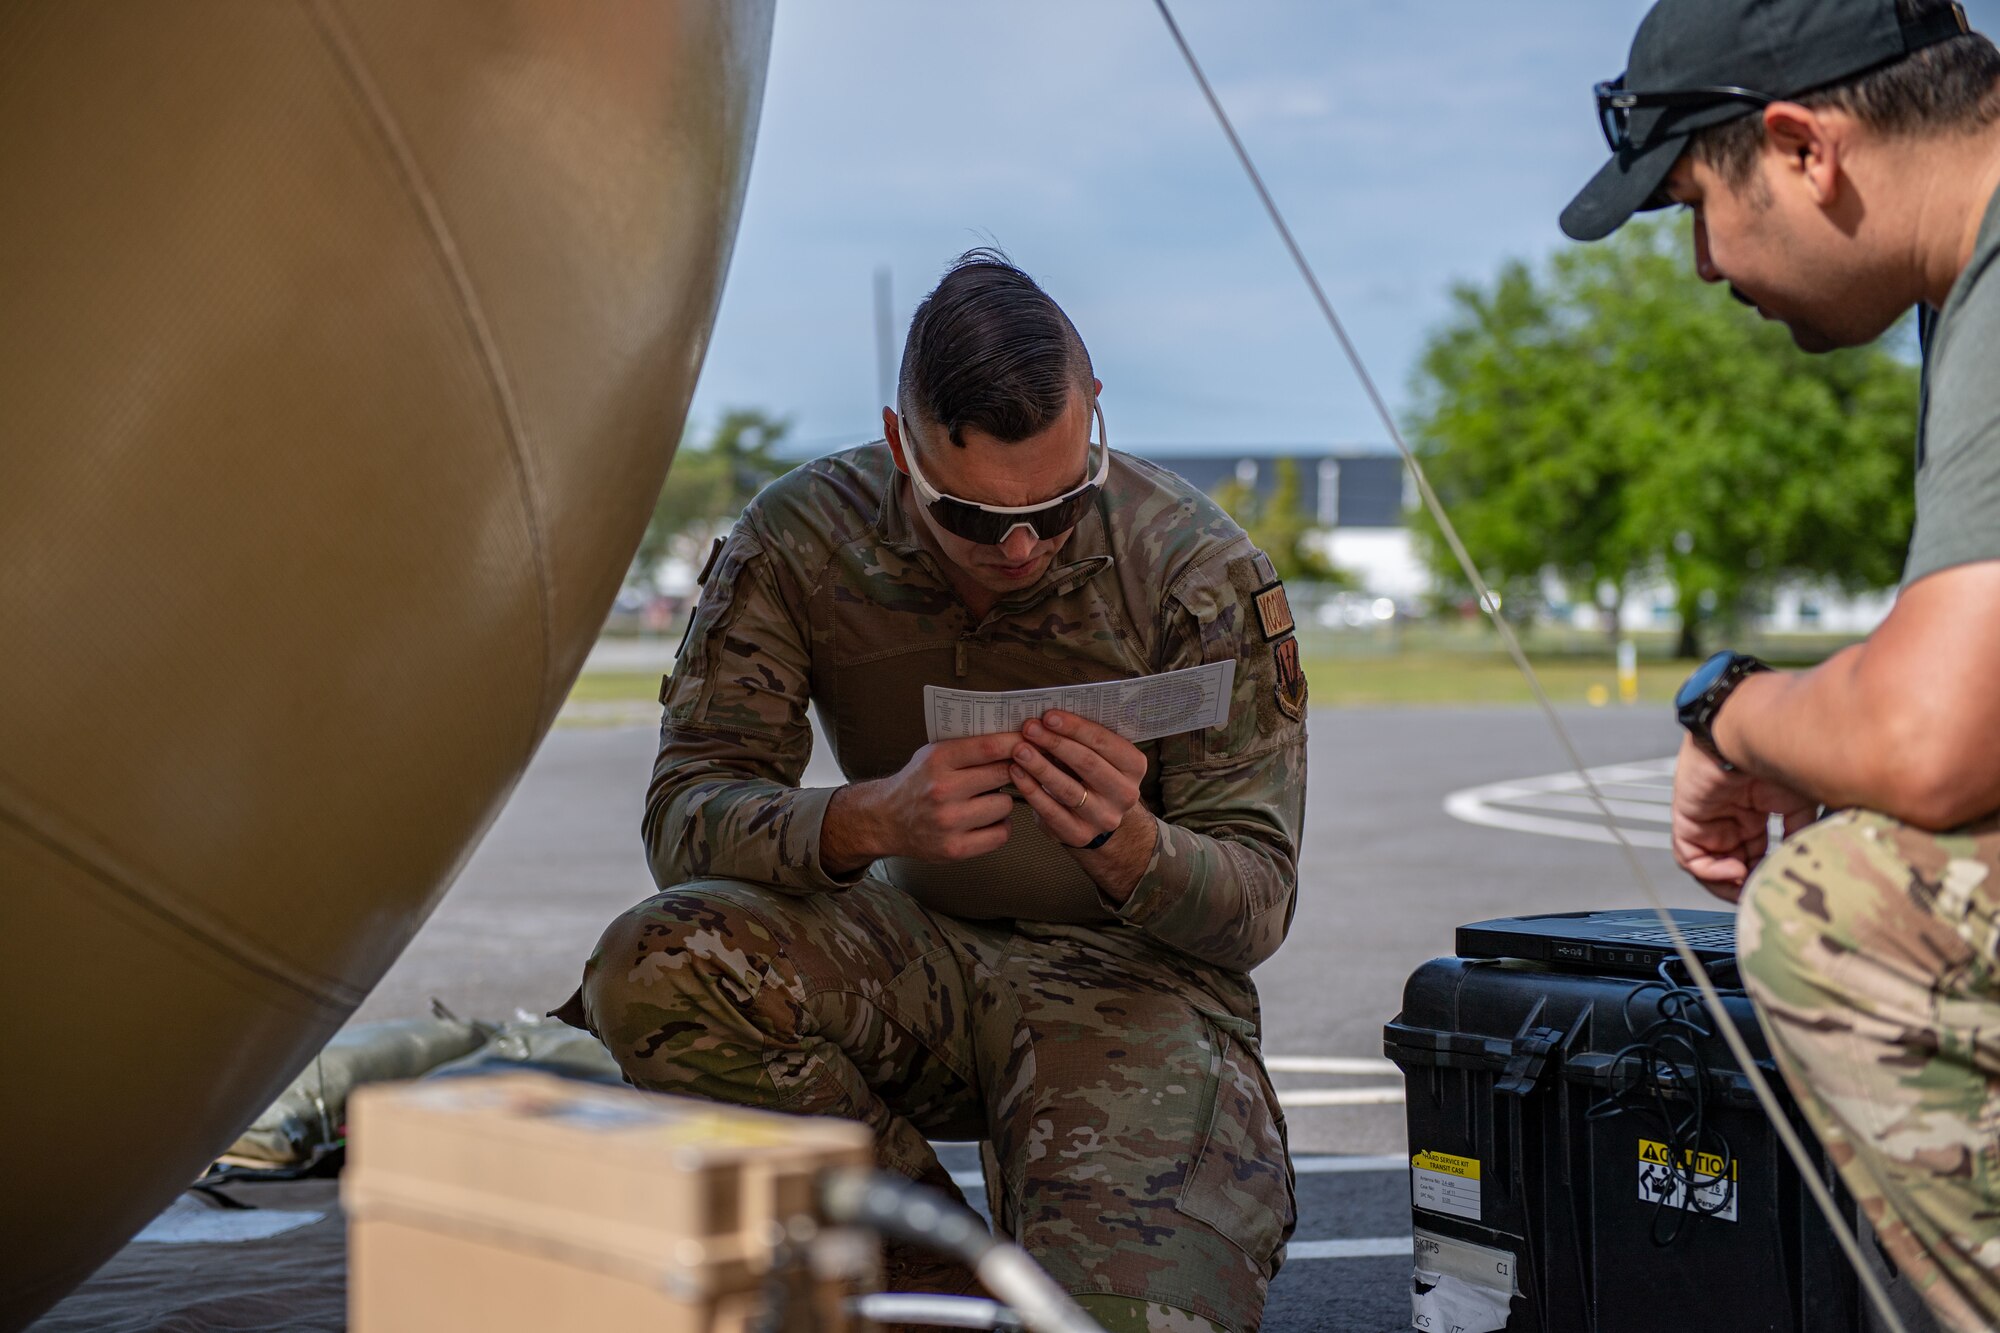 U.S. Air Force Tech. Sgt. Leif Anderson, 52nd Combat Communications Squadron tactical communications supervisor, reads a satellite slide rule next to a Global Air Terminal Radio during Exercise Ready Tiger 24-1 at Savannah Air National Guard Base, Georgia, April 9, 2024. Equipment such as the GATR establishes secure communication for command and control in distributed operations. The Ready Tiger 24-1 exercise evaluators will assess the 23rd Wing's proficiency in employing decentralized command and control to fulfill air tasking orders across geographically dispersed areas amid communication challenges. (U.S. Air Force photo by Senior Airman Courtney Sebastianelli)